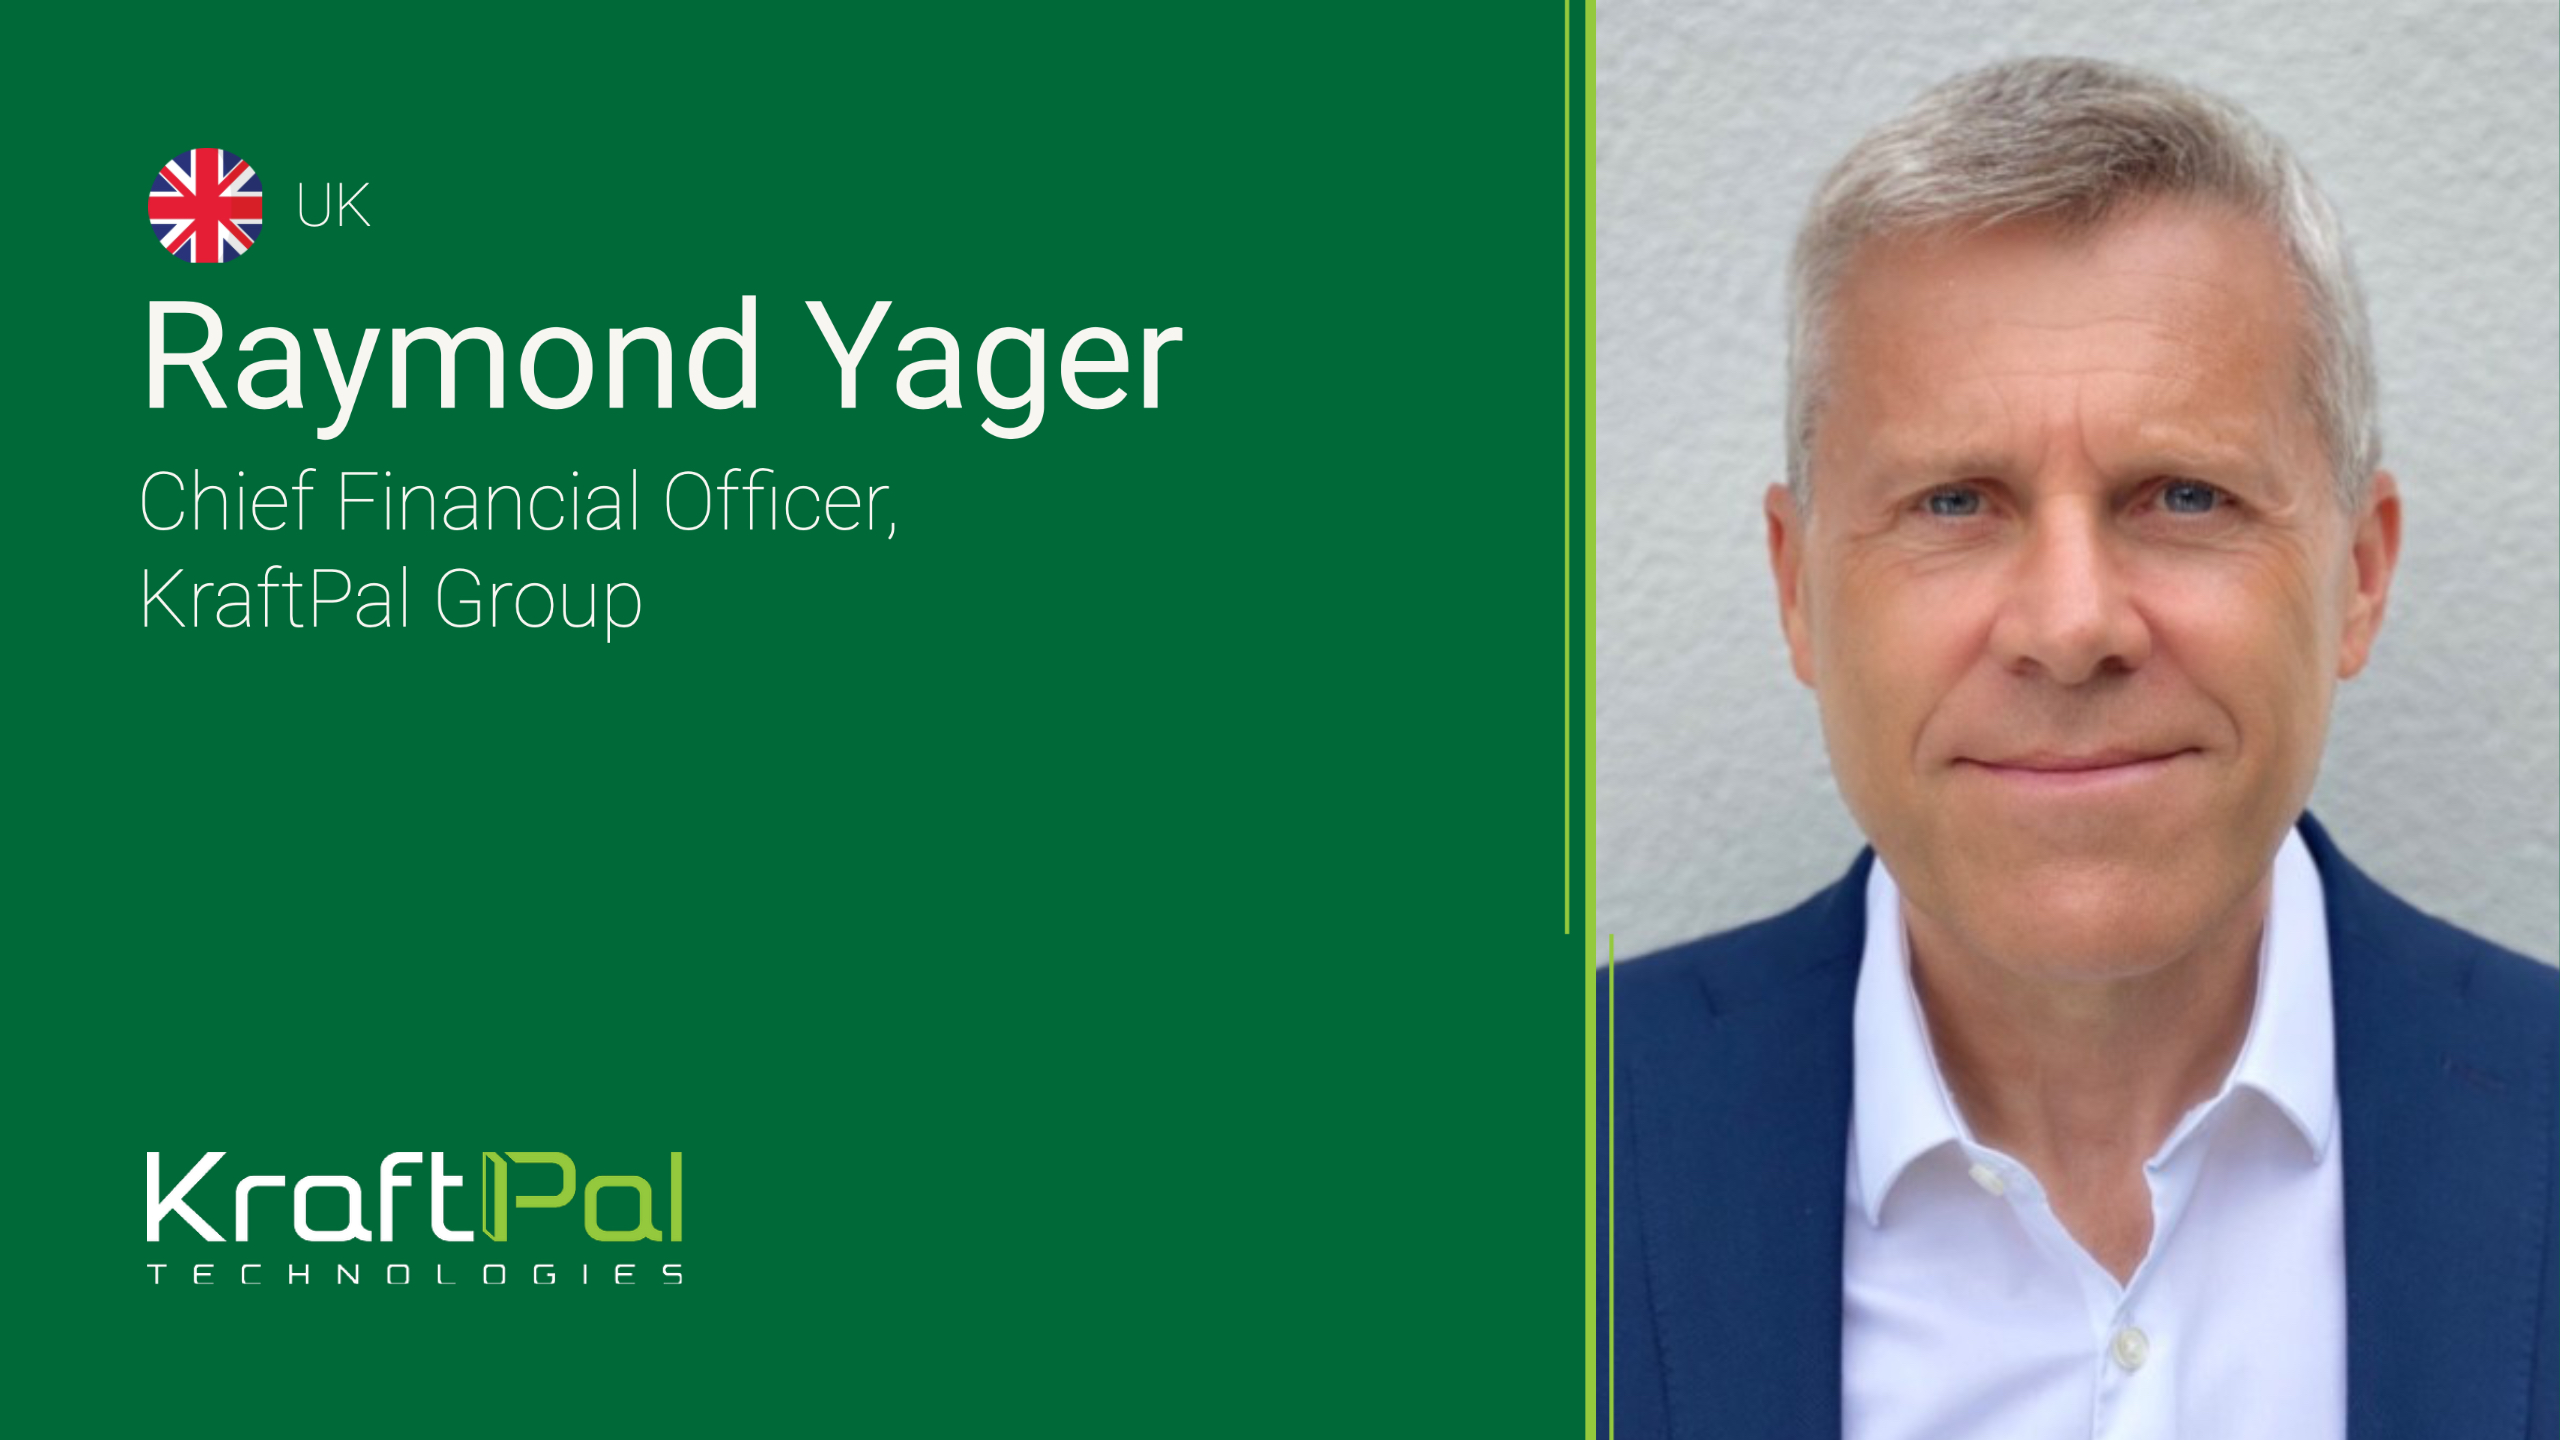 KraftPal Technologies Announces Raymond Yager as New Chief Financial Officer